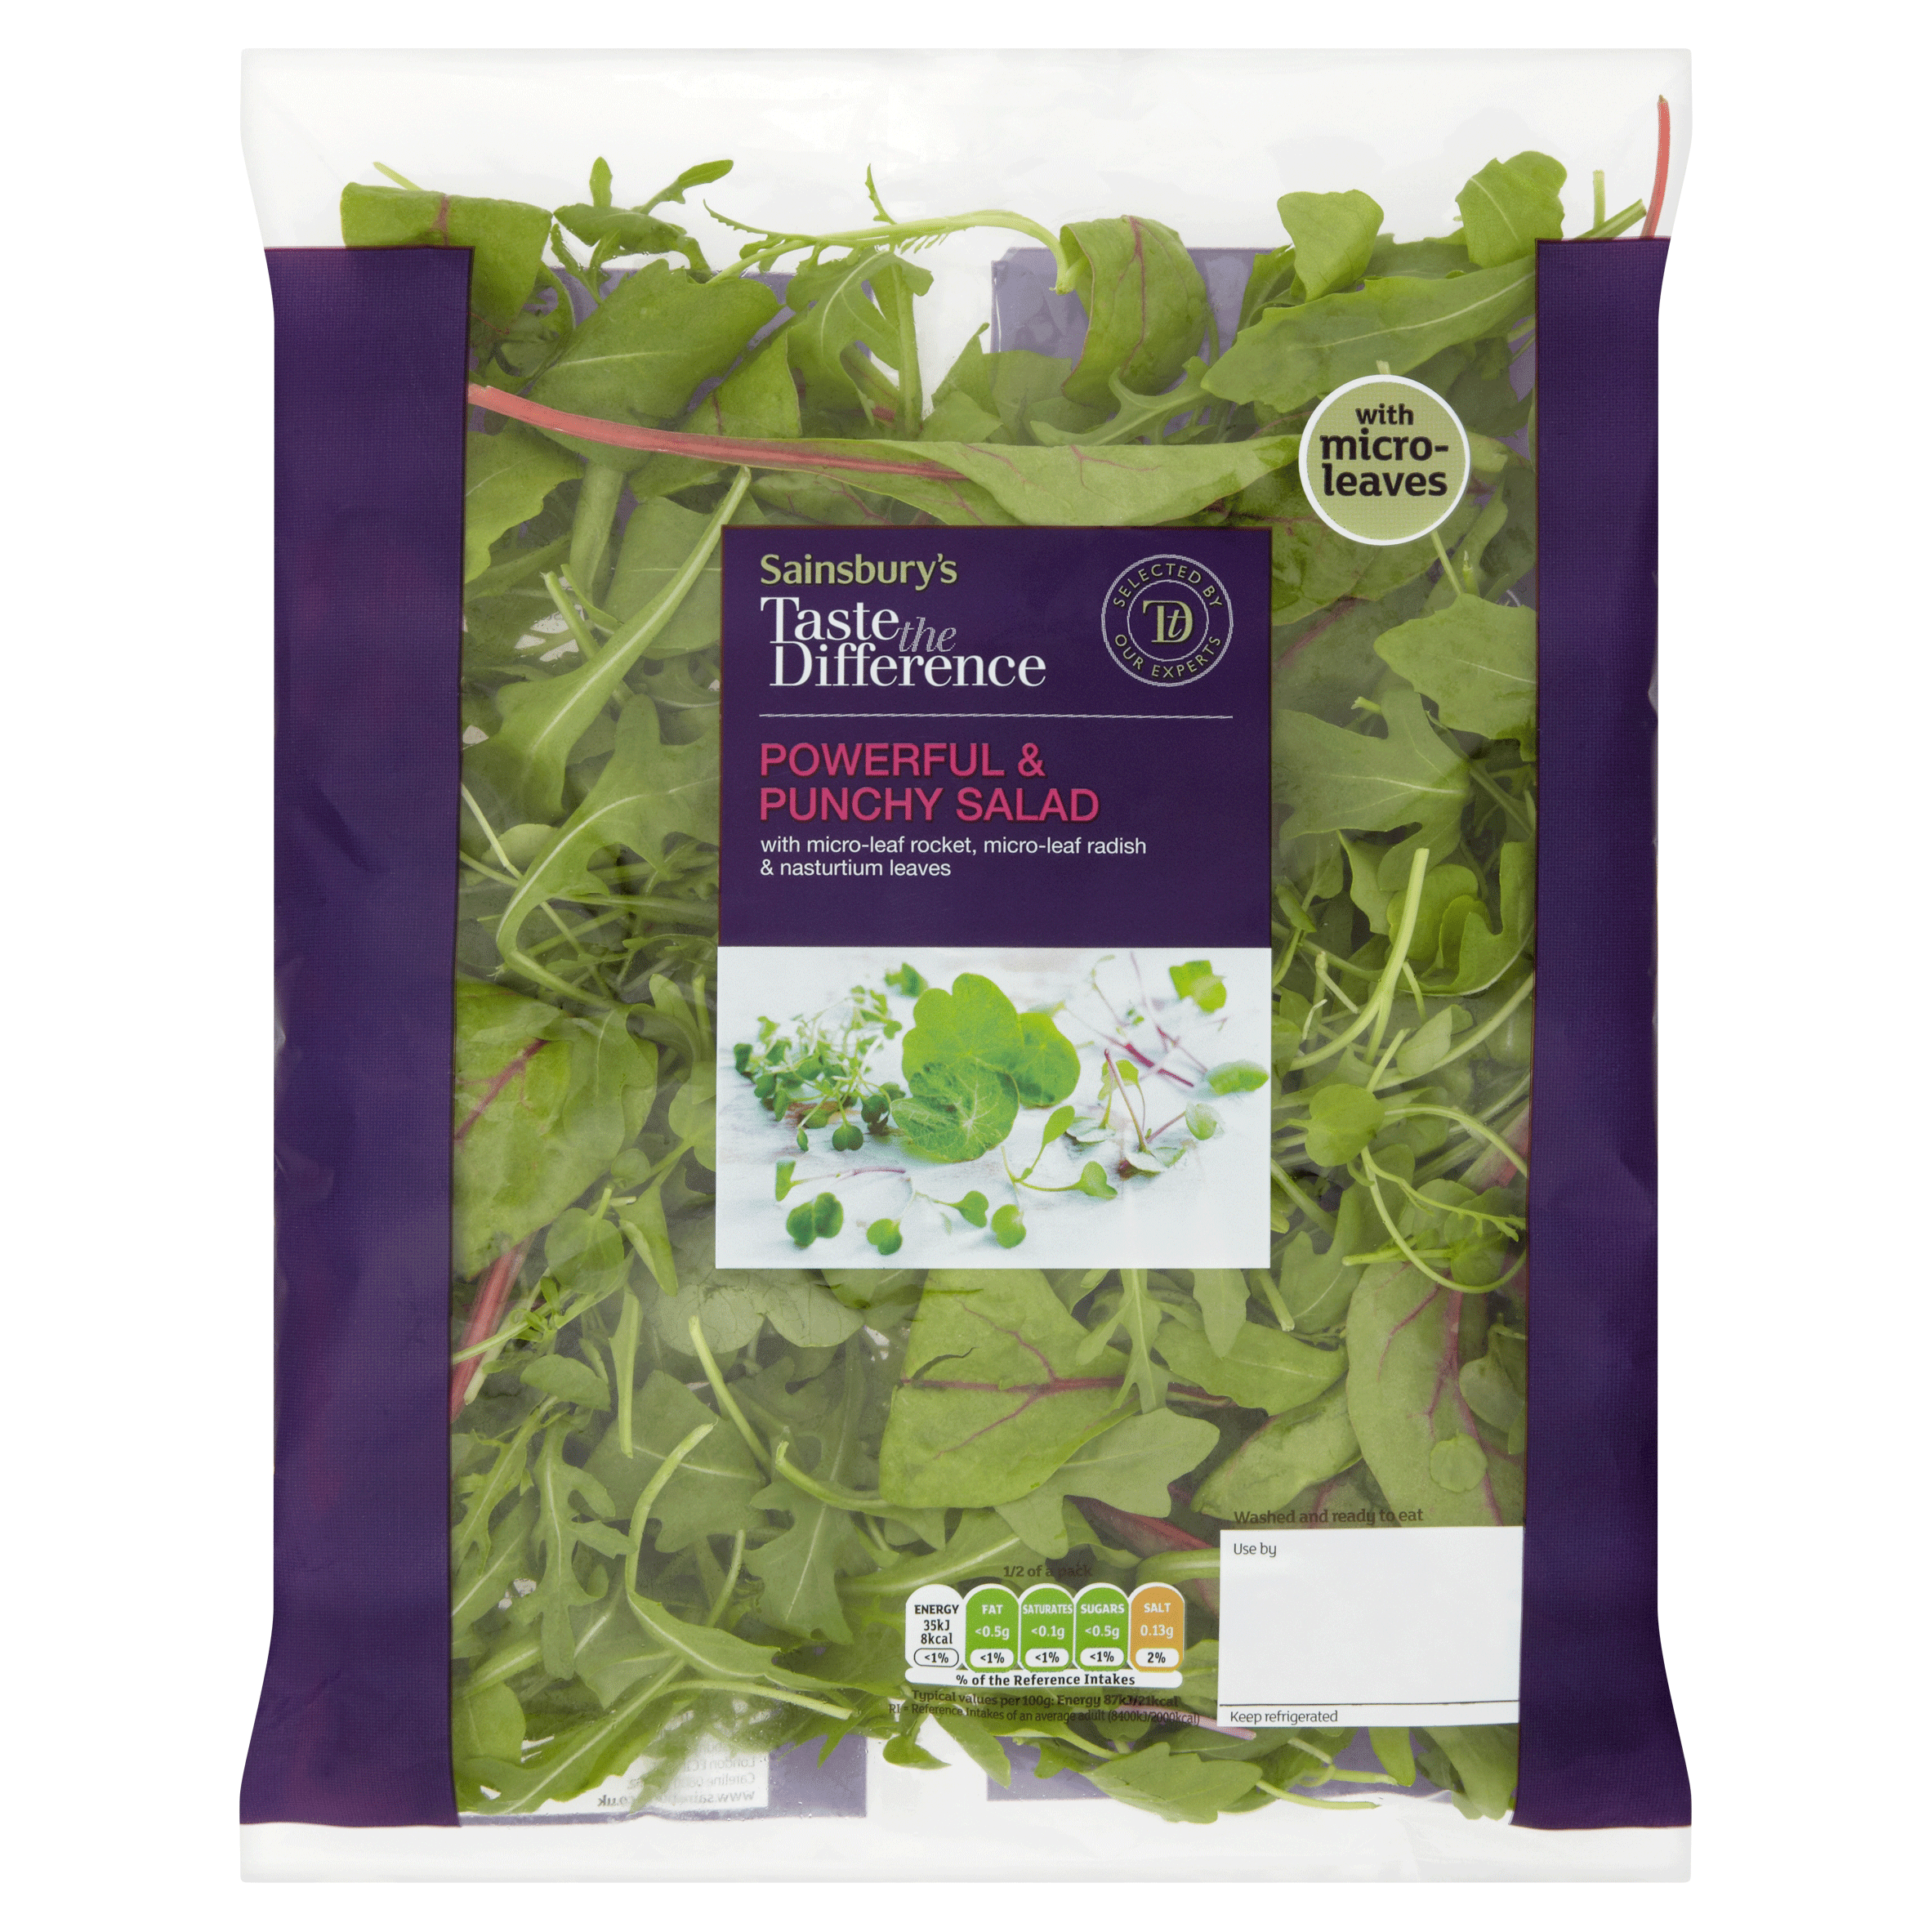 Sainsbury's Taste The Difference Powerful and Punchy Salad